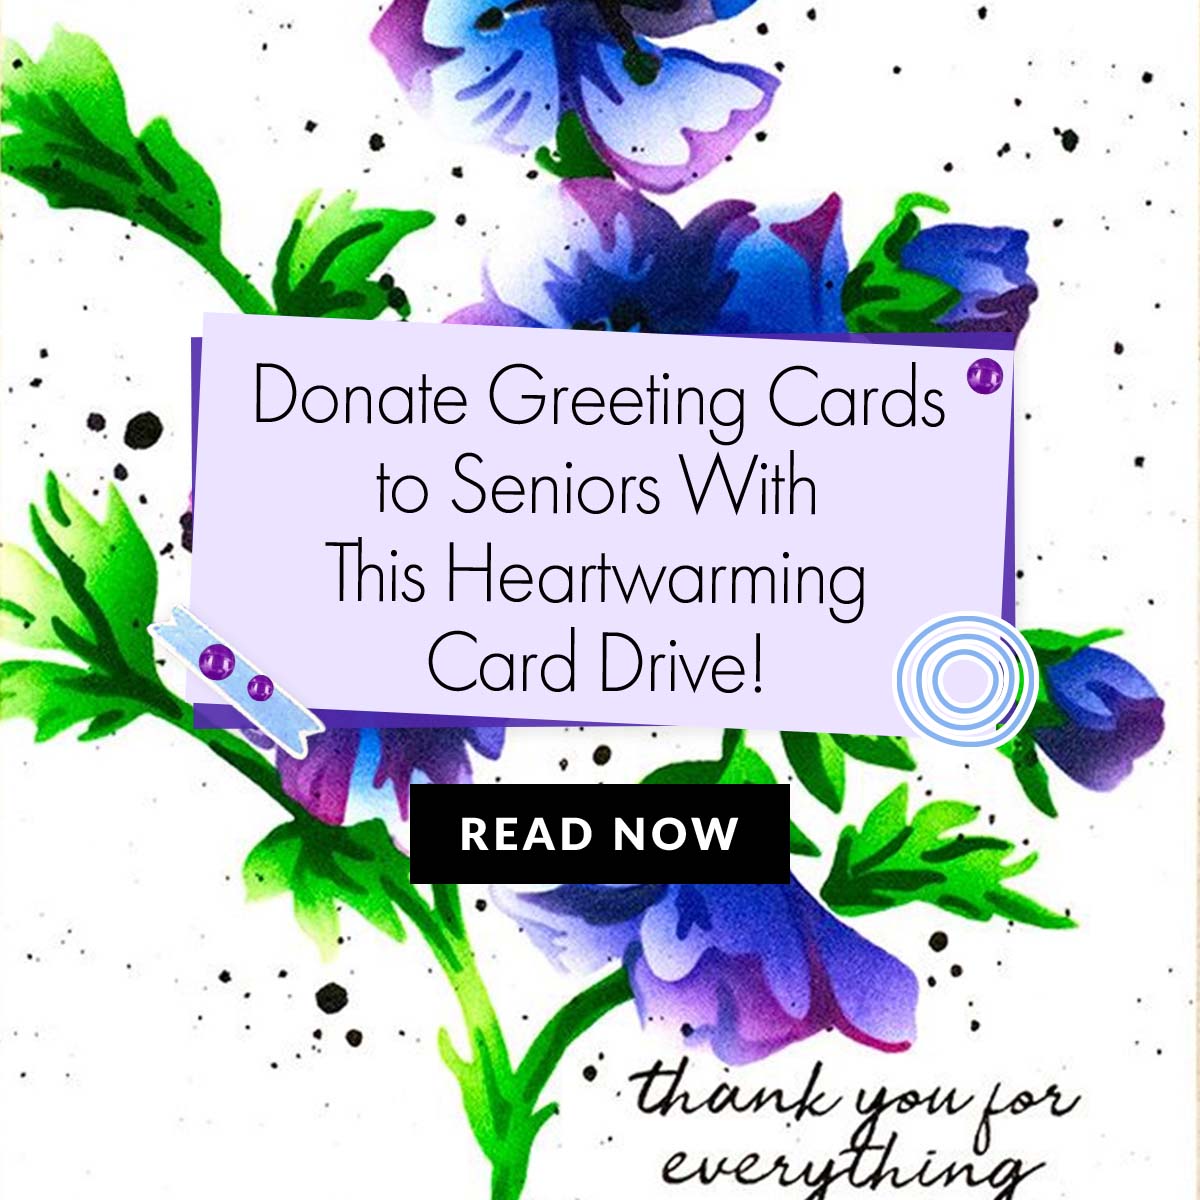 Donate Your Cards Through This Heartwarming Card Drive!